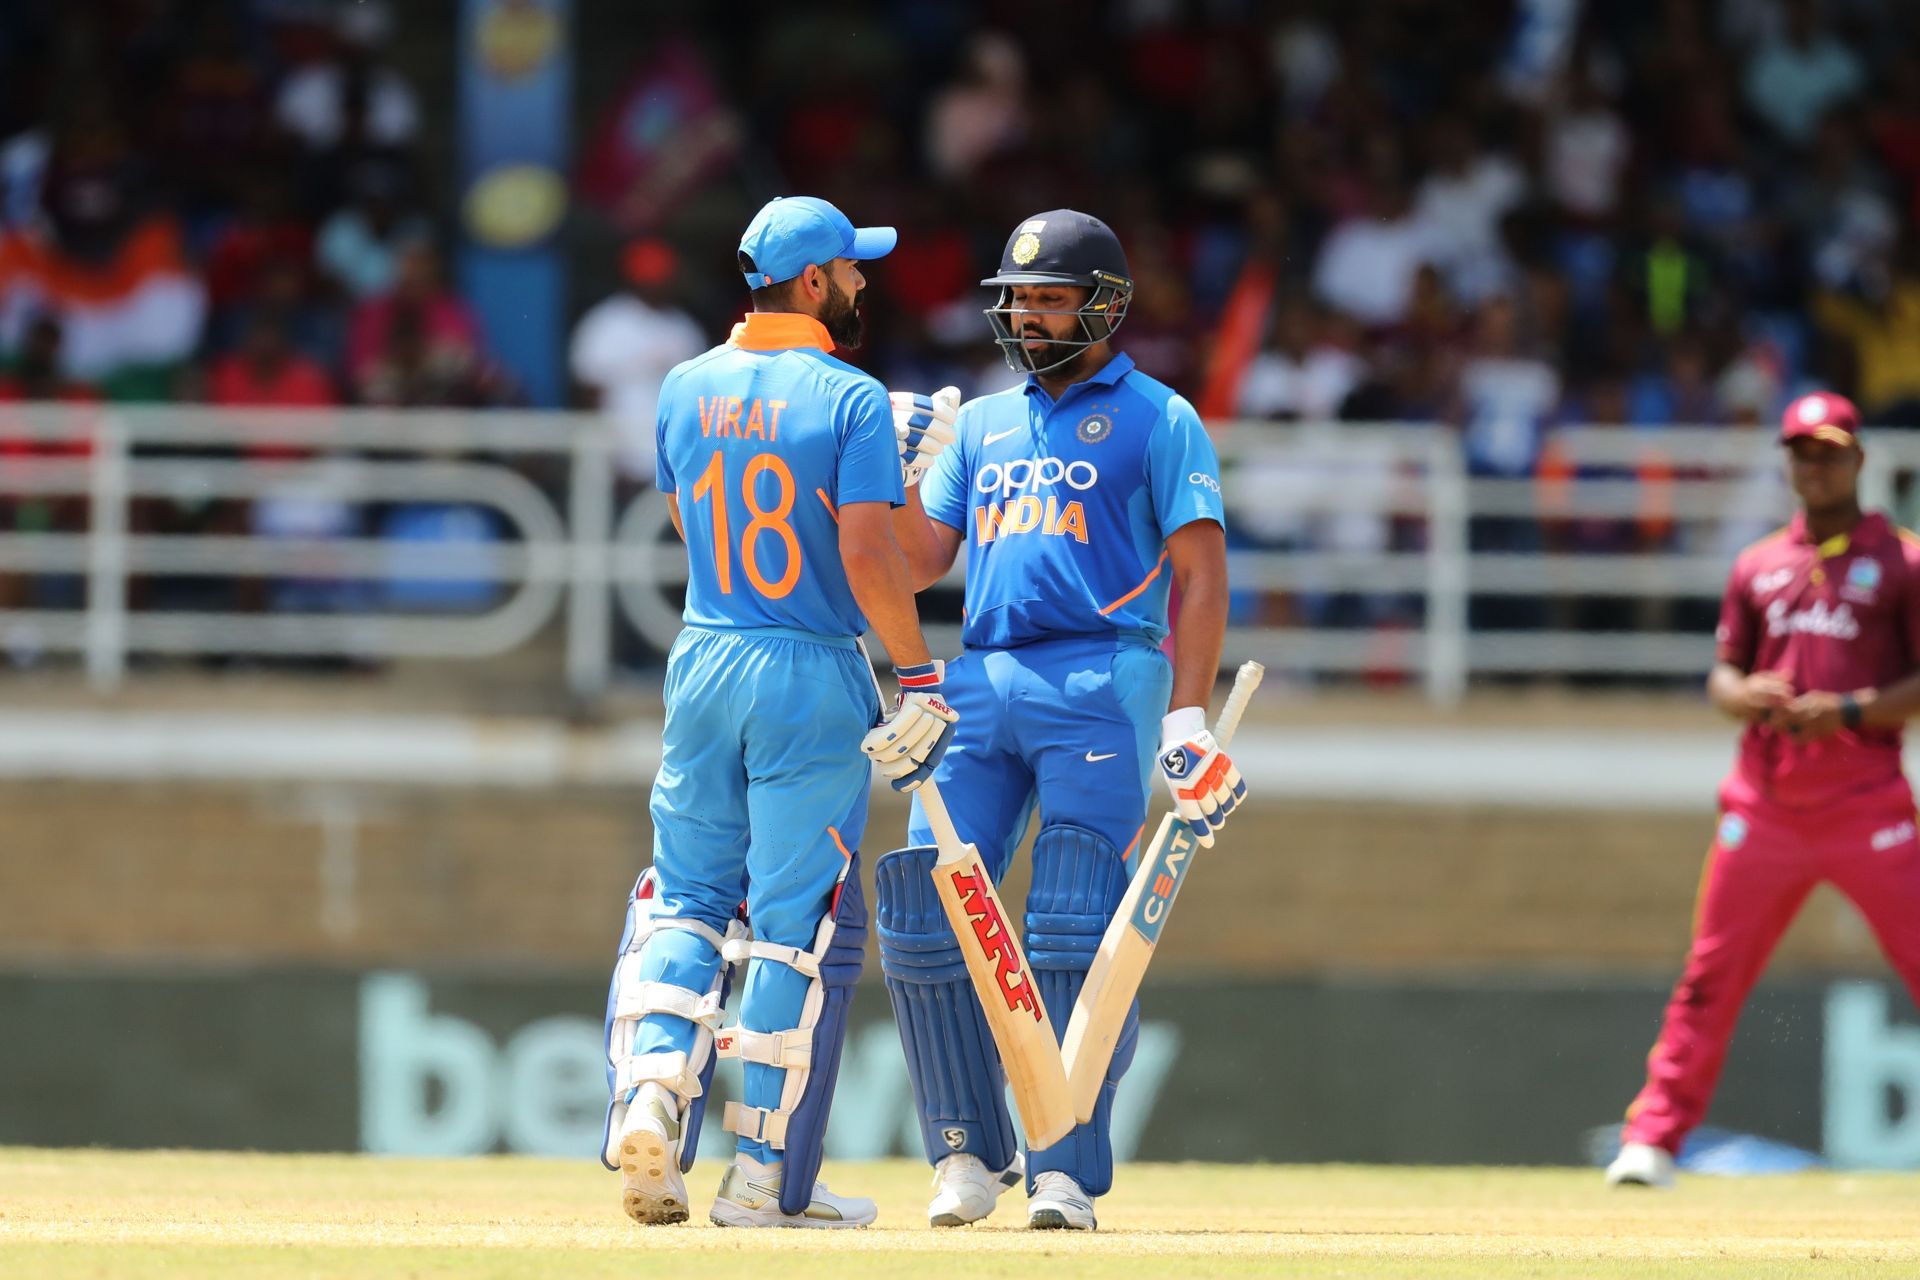 Virat Kohli and Rohit Sharma will take the field together for the first time since the T20 World Cup